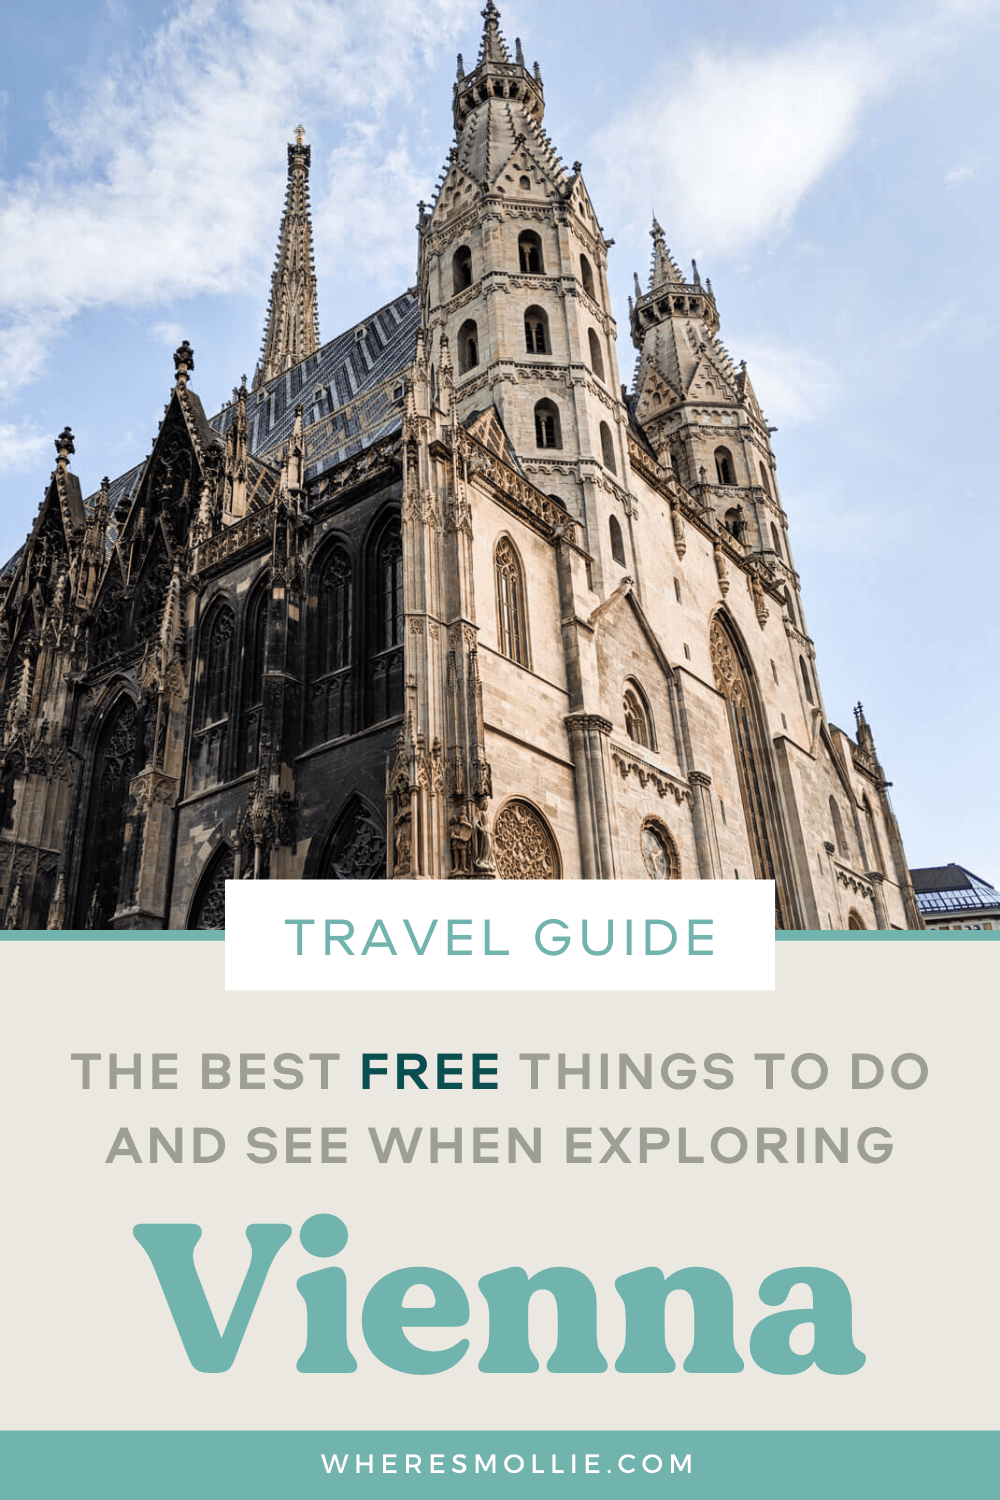 16 things to do in Vienna on a budget